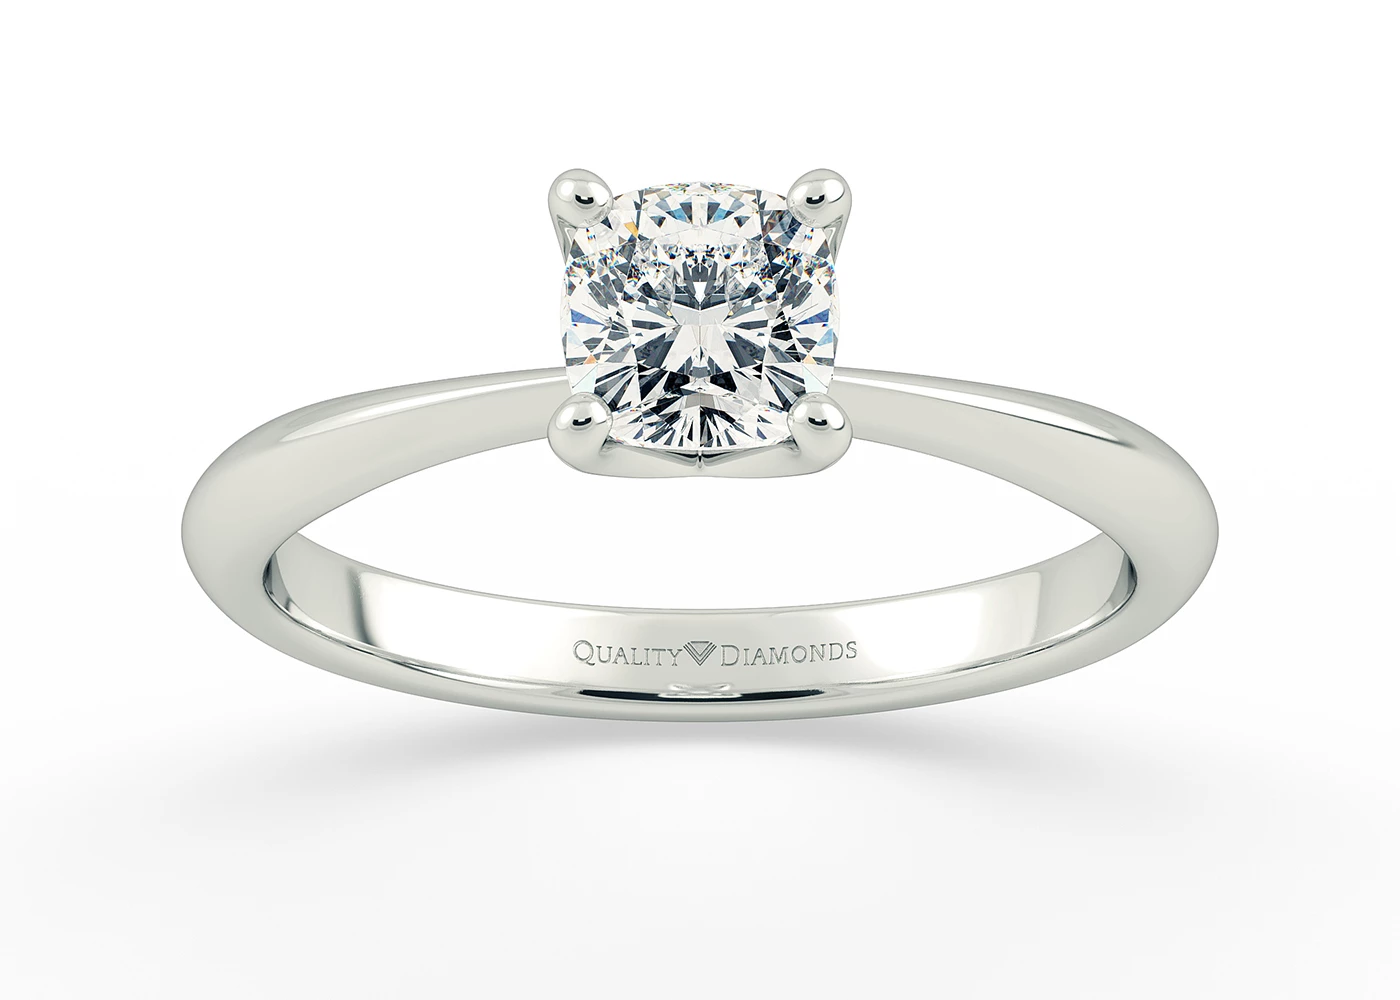 Half Carat Cushion Solitaire Diamond Engagement Ring in 9K White Gold